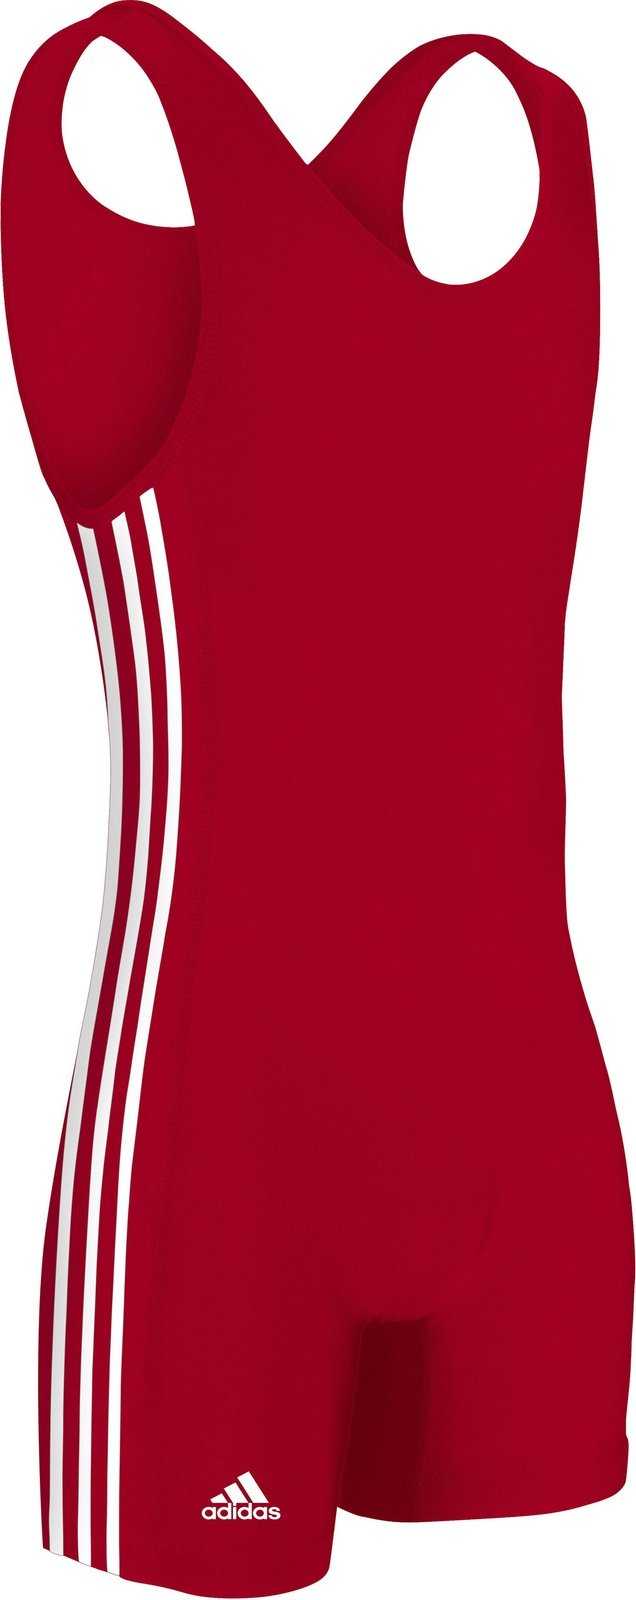 Adidas aS102s 3 Stripe Wrestling Singlet - Red White - HIT a Double